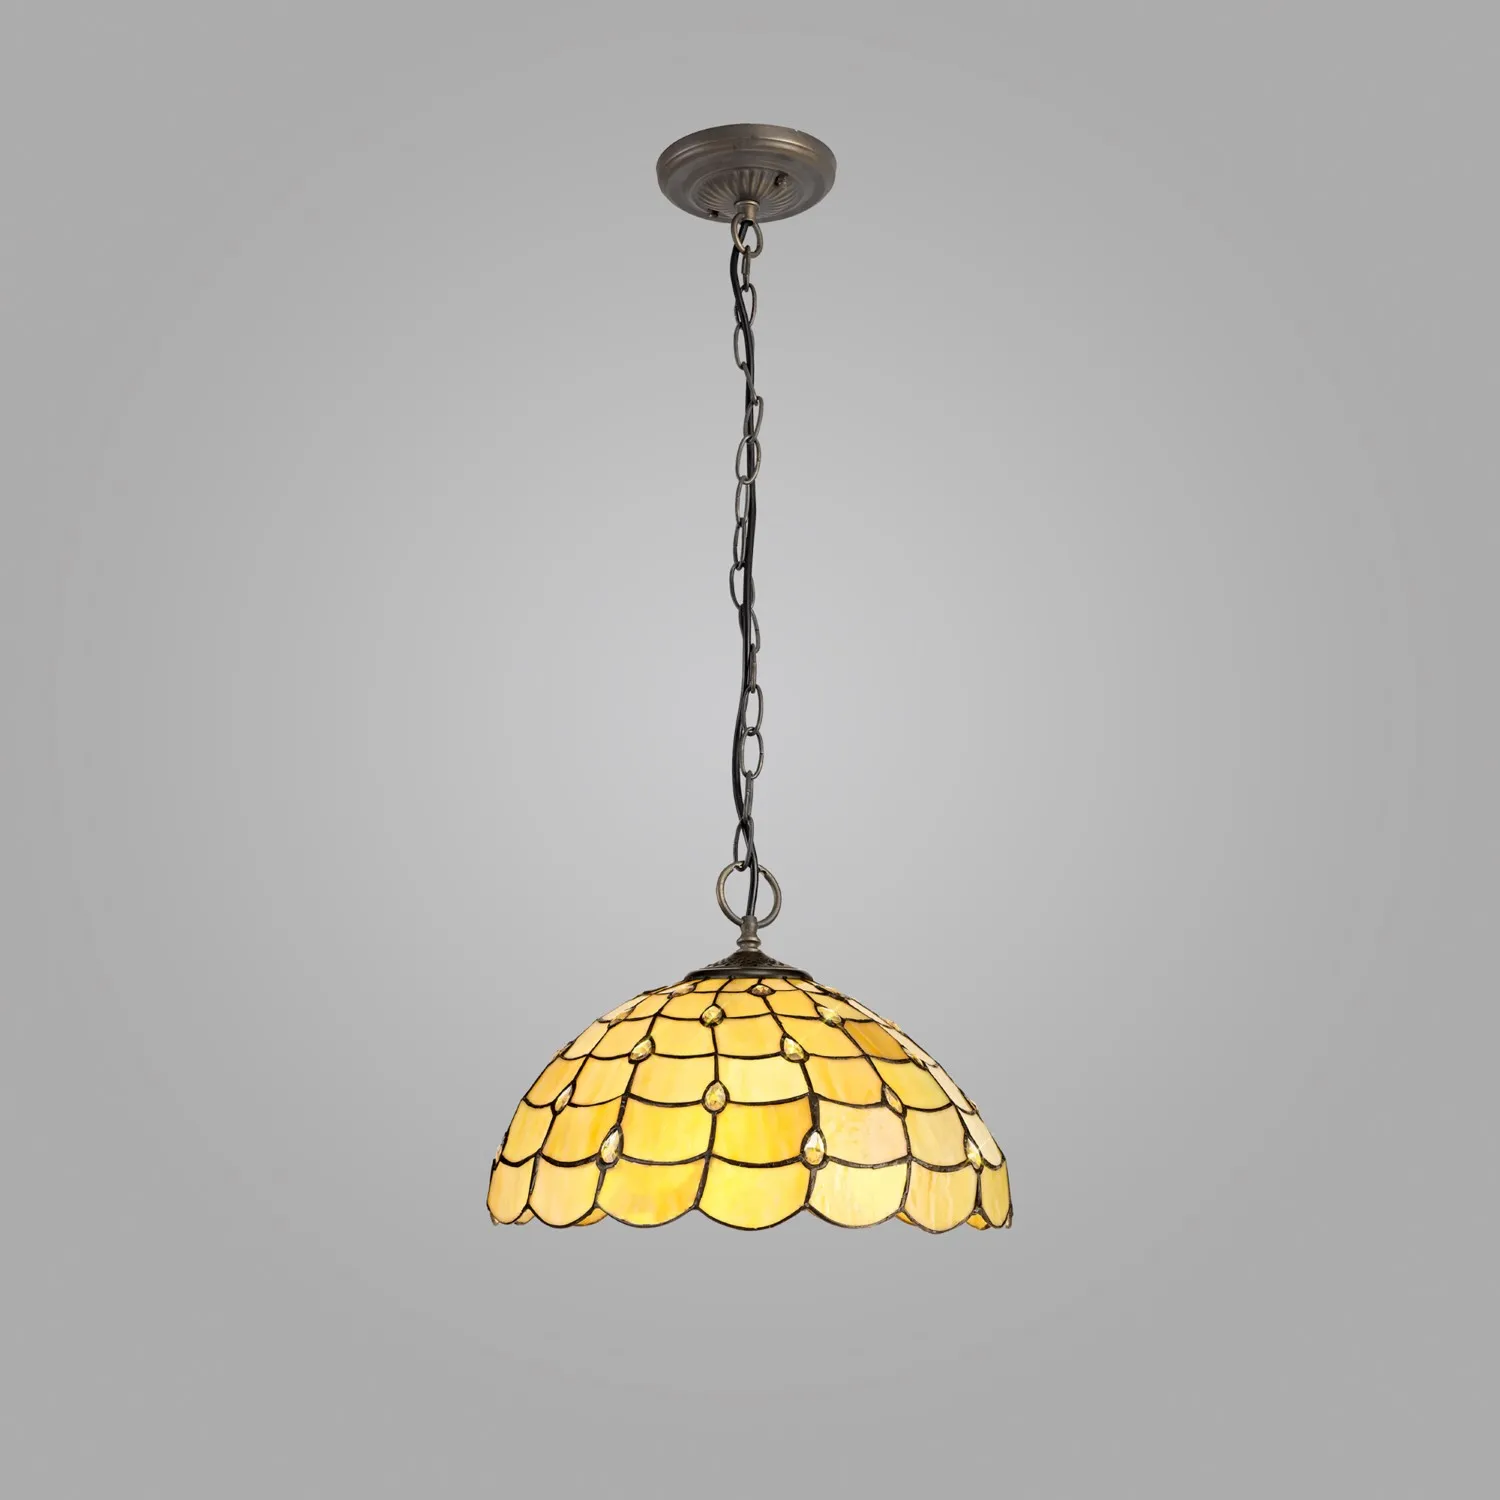 Stratford 3 Light Downlighter Pendant E27 With 40cm Tiffany Shade, Beige Clear Crystal Aged Antique Brass